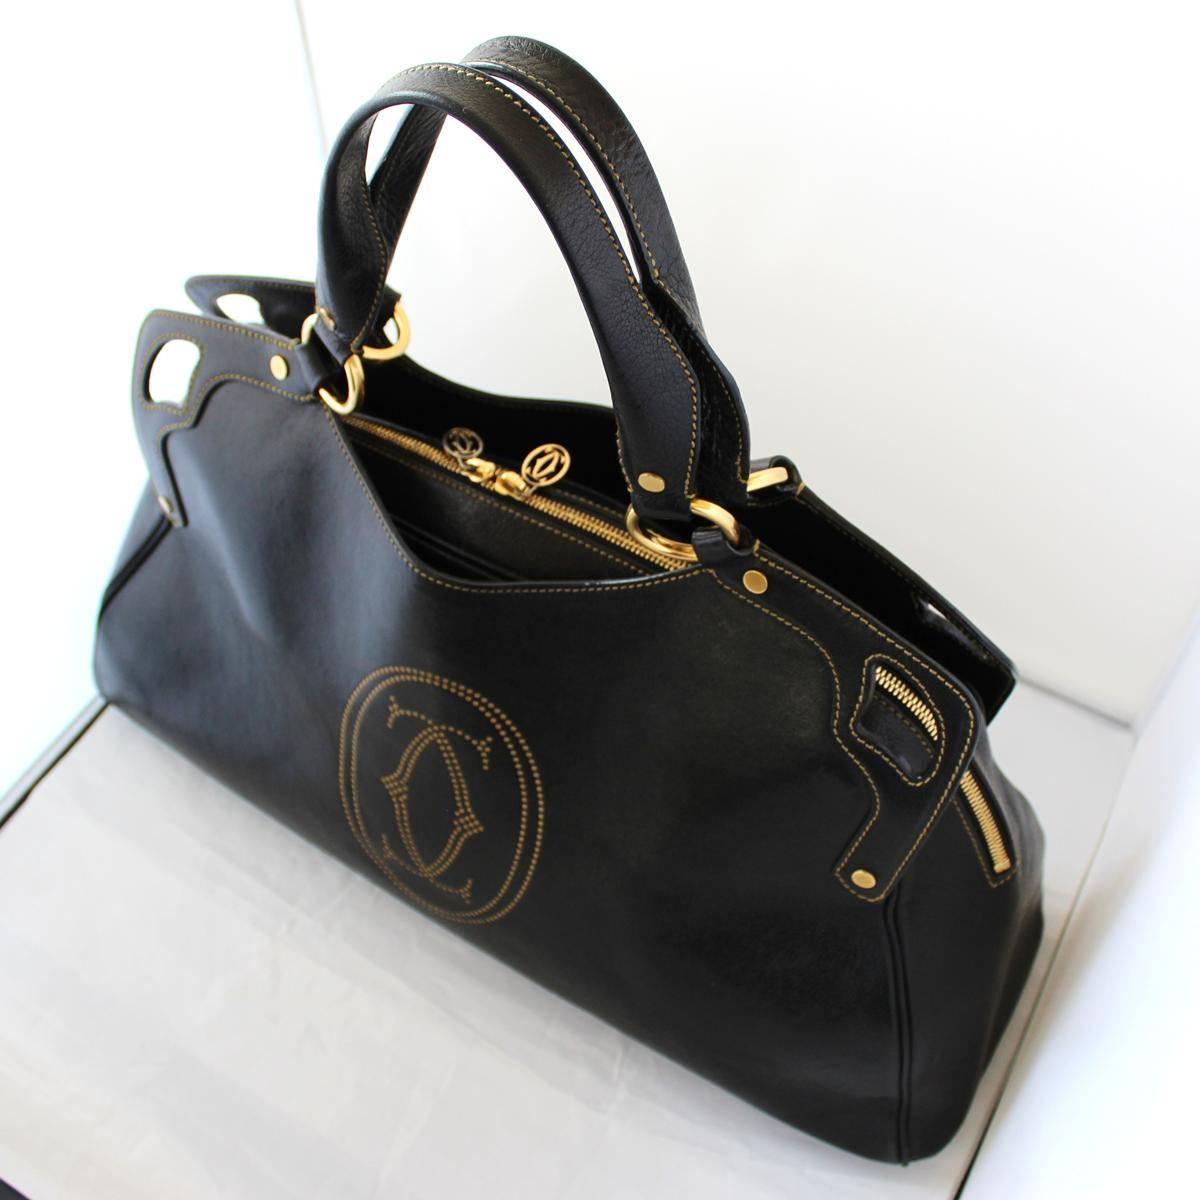 Leather
Black color
Two handles
Golden brass elements
Zip closure
Two external pockets
Internal zip pocket and phone holder
Cm 48 x 28 x 18 (18.8 x 11  x 7 inches)
Worldwide express shipping included in the price !